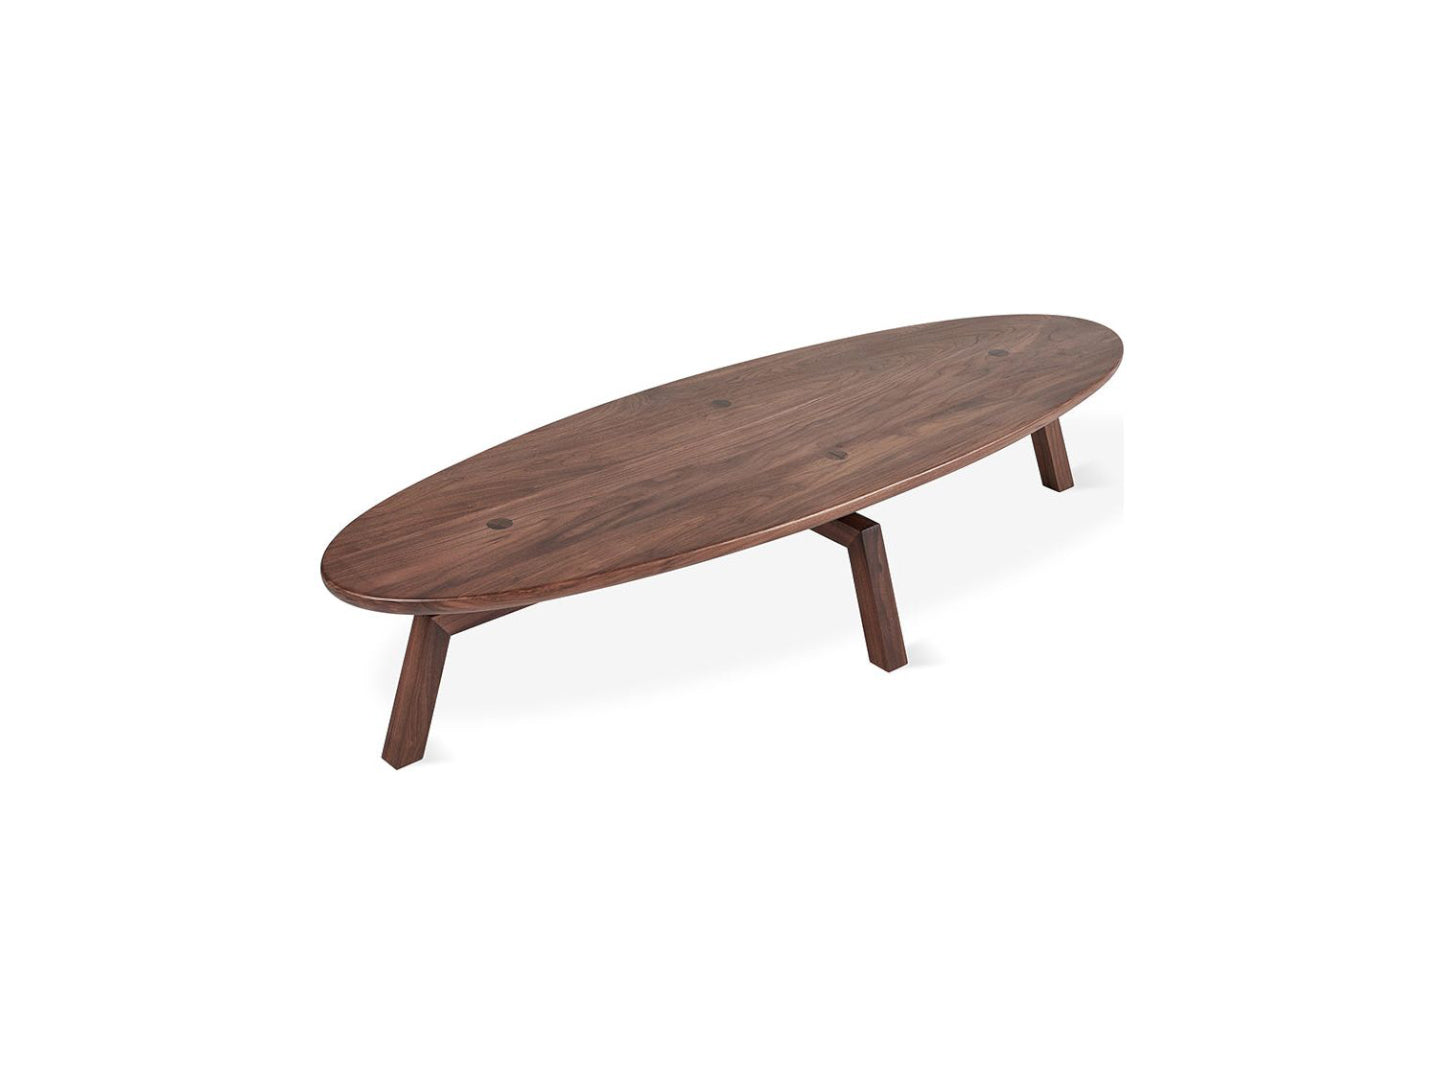 Solana Oval Coffee Table by Gus* Modern